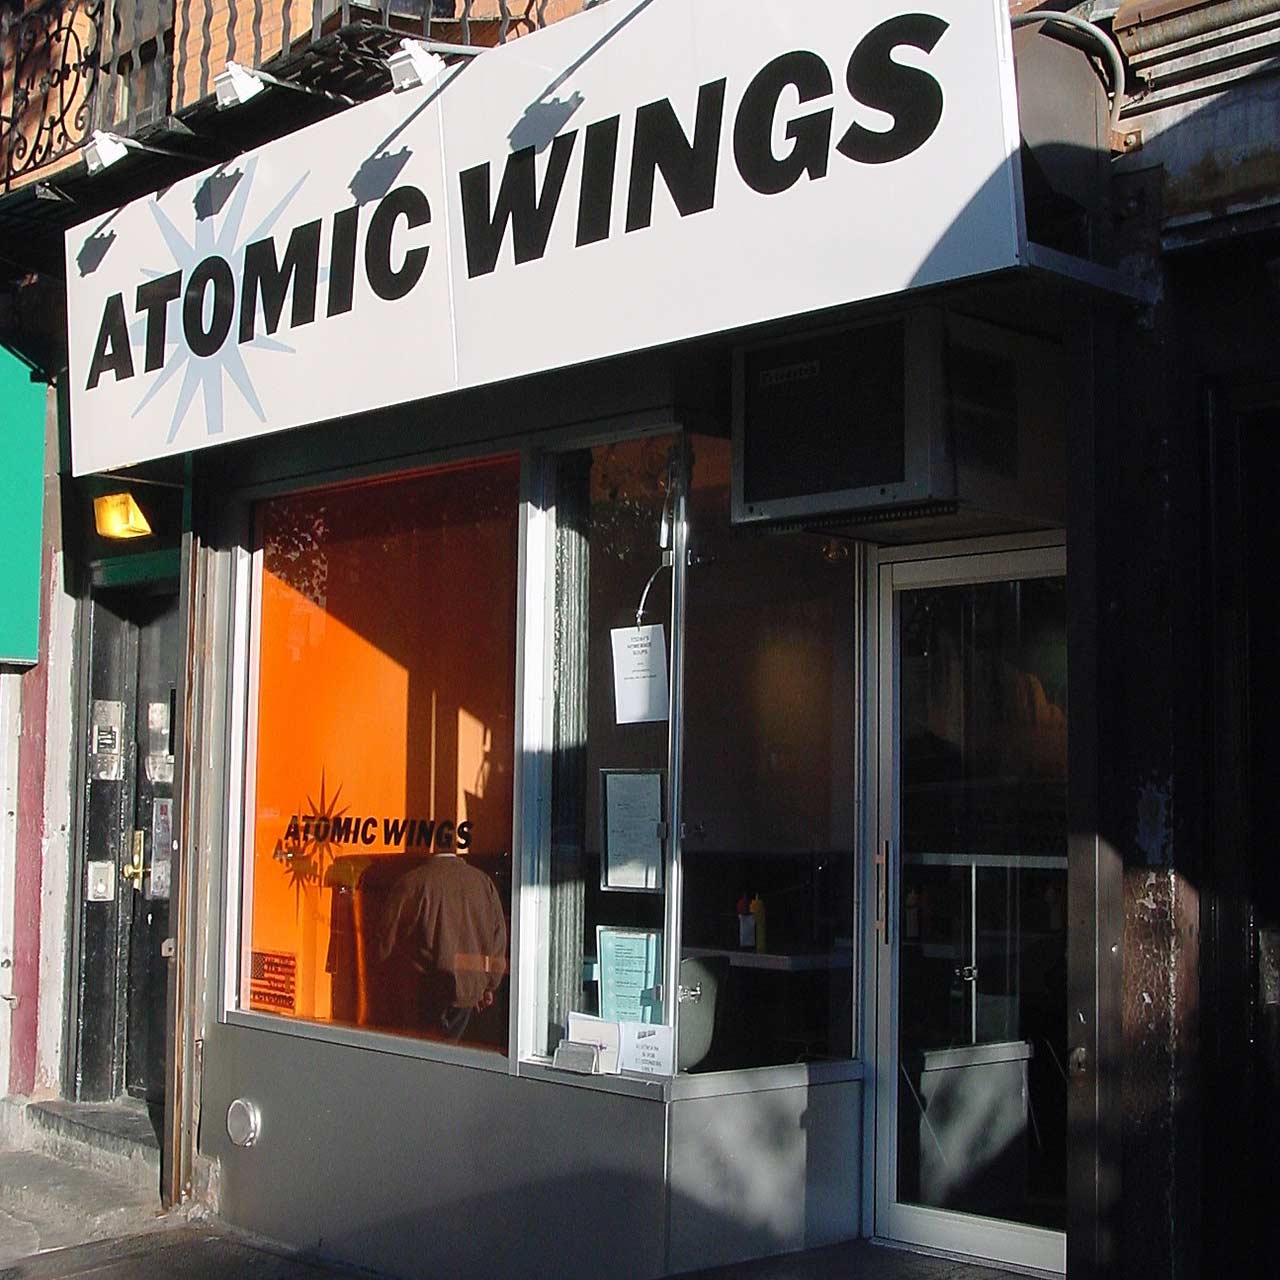 The storefront of Atomic Wings, with a bold sign in white with black letters.